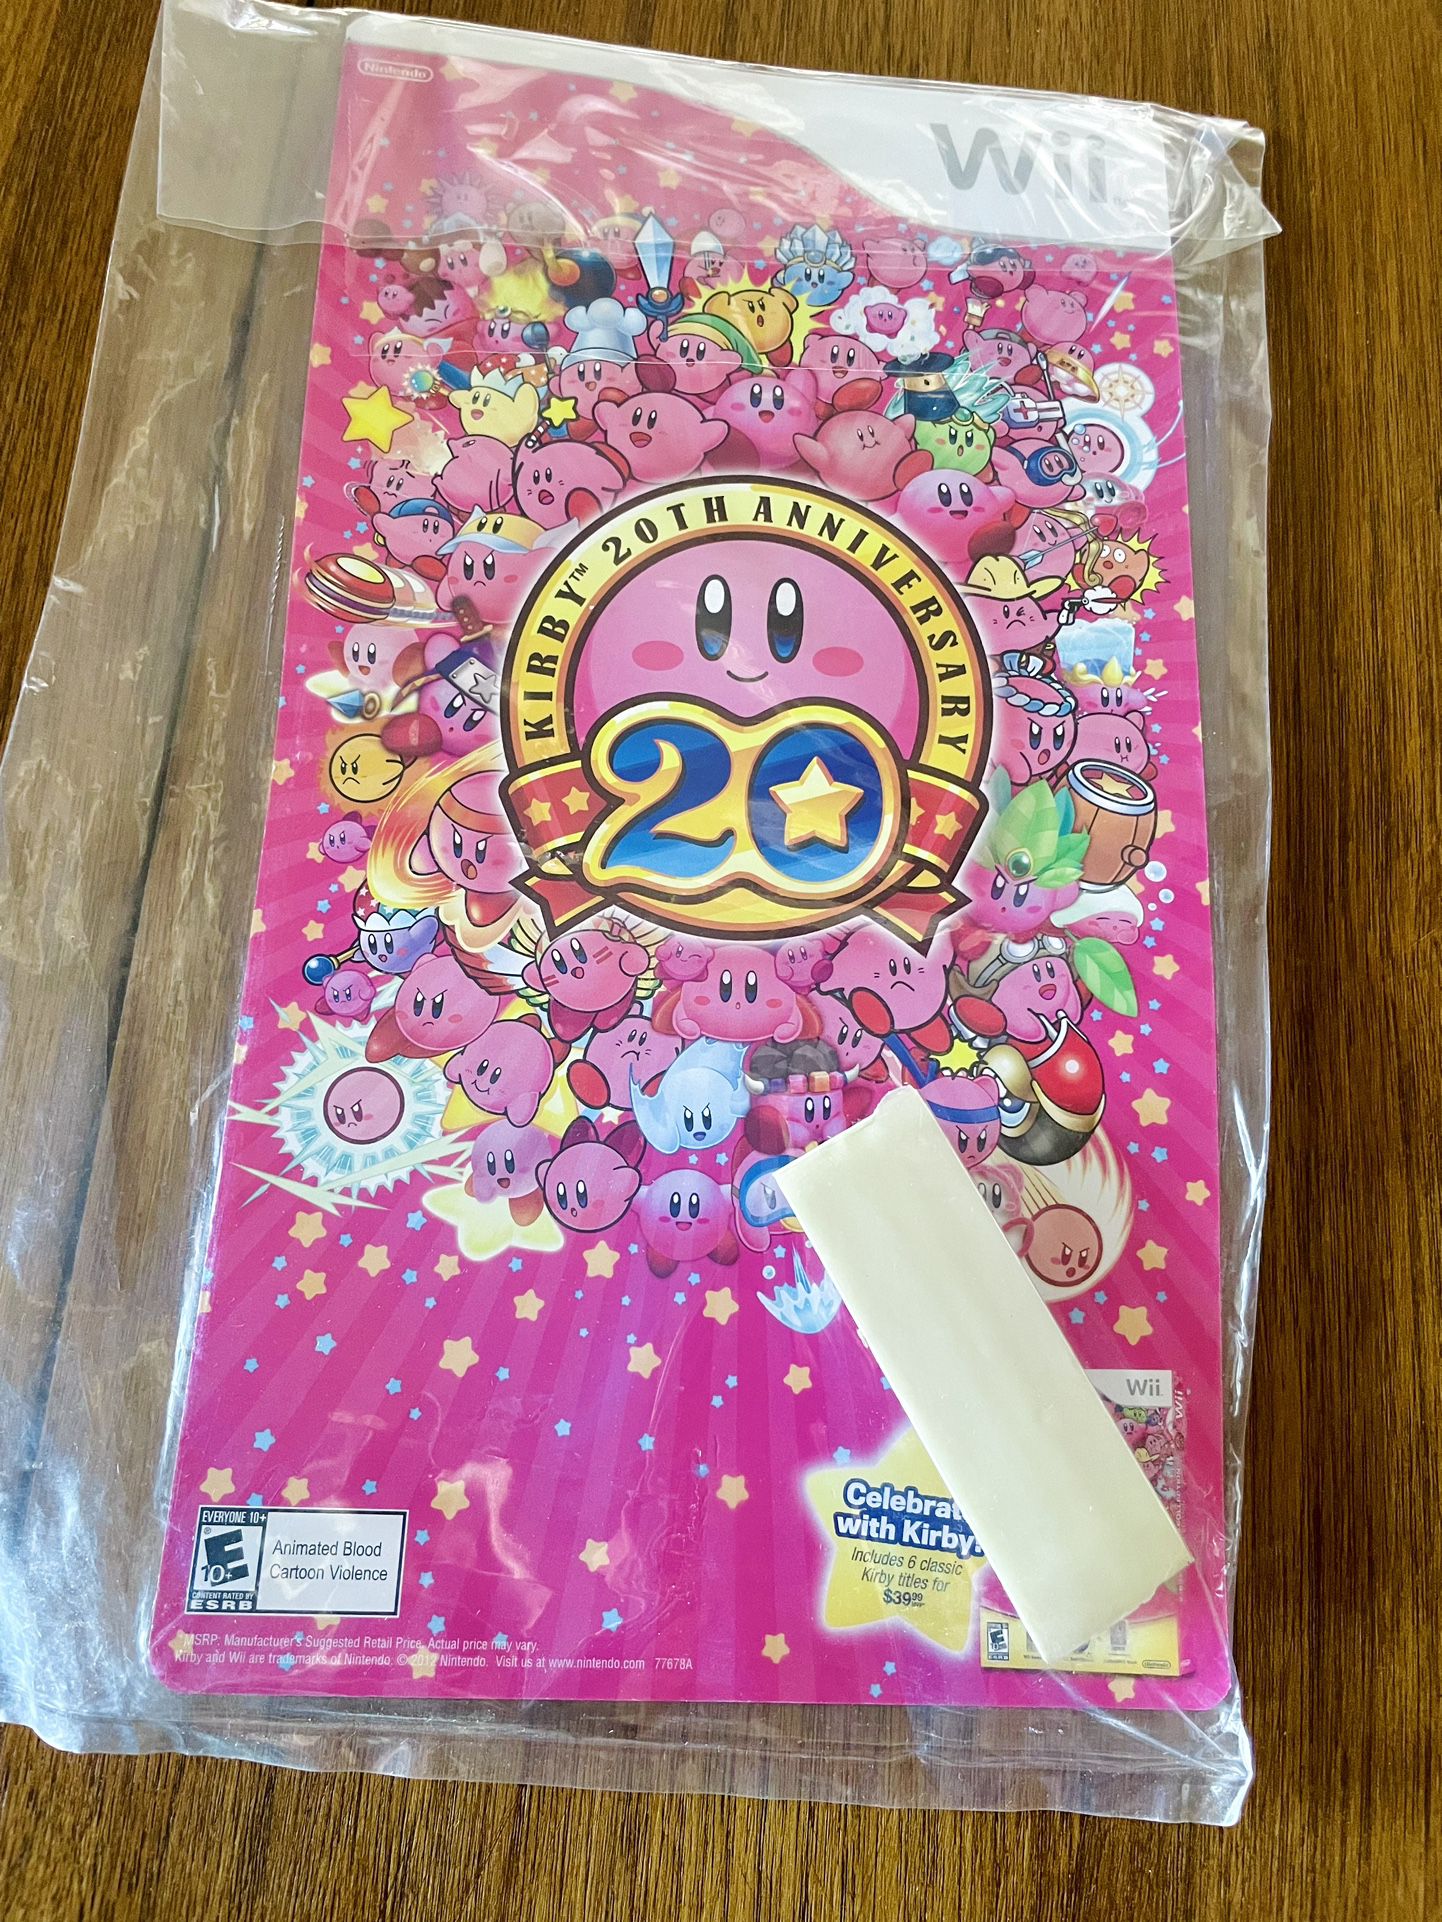 Nintendo Wii Kirby 20th Anniversary Promo clip On Shelf Display New in package